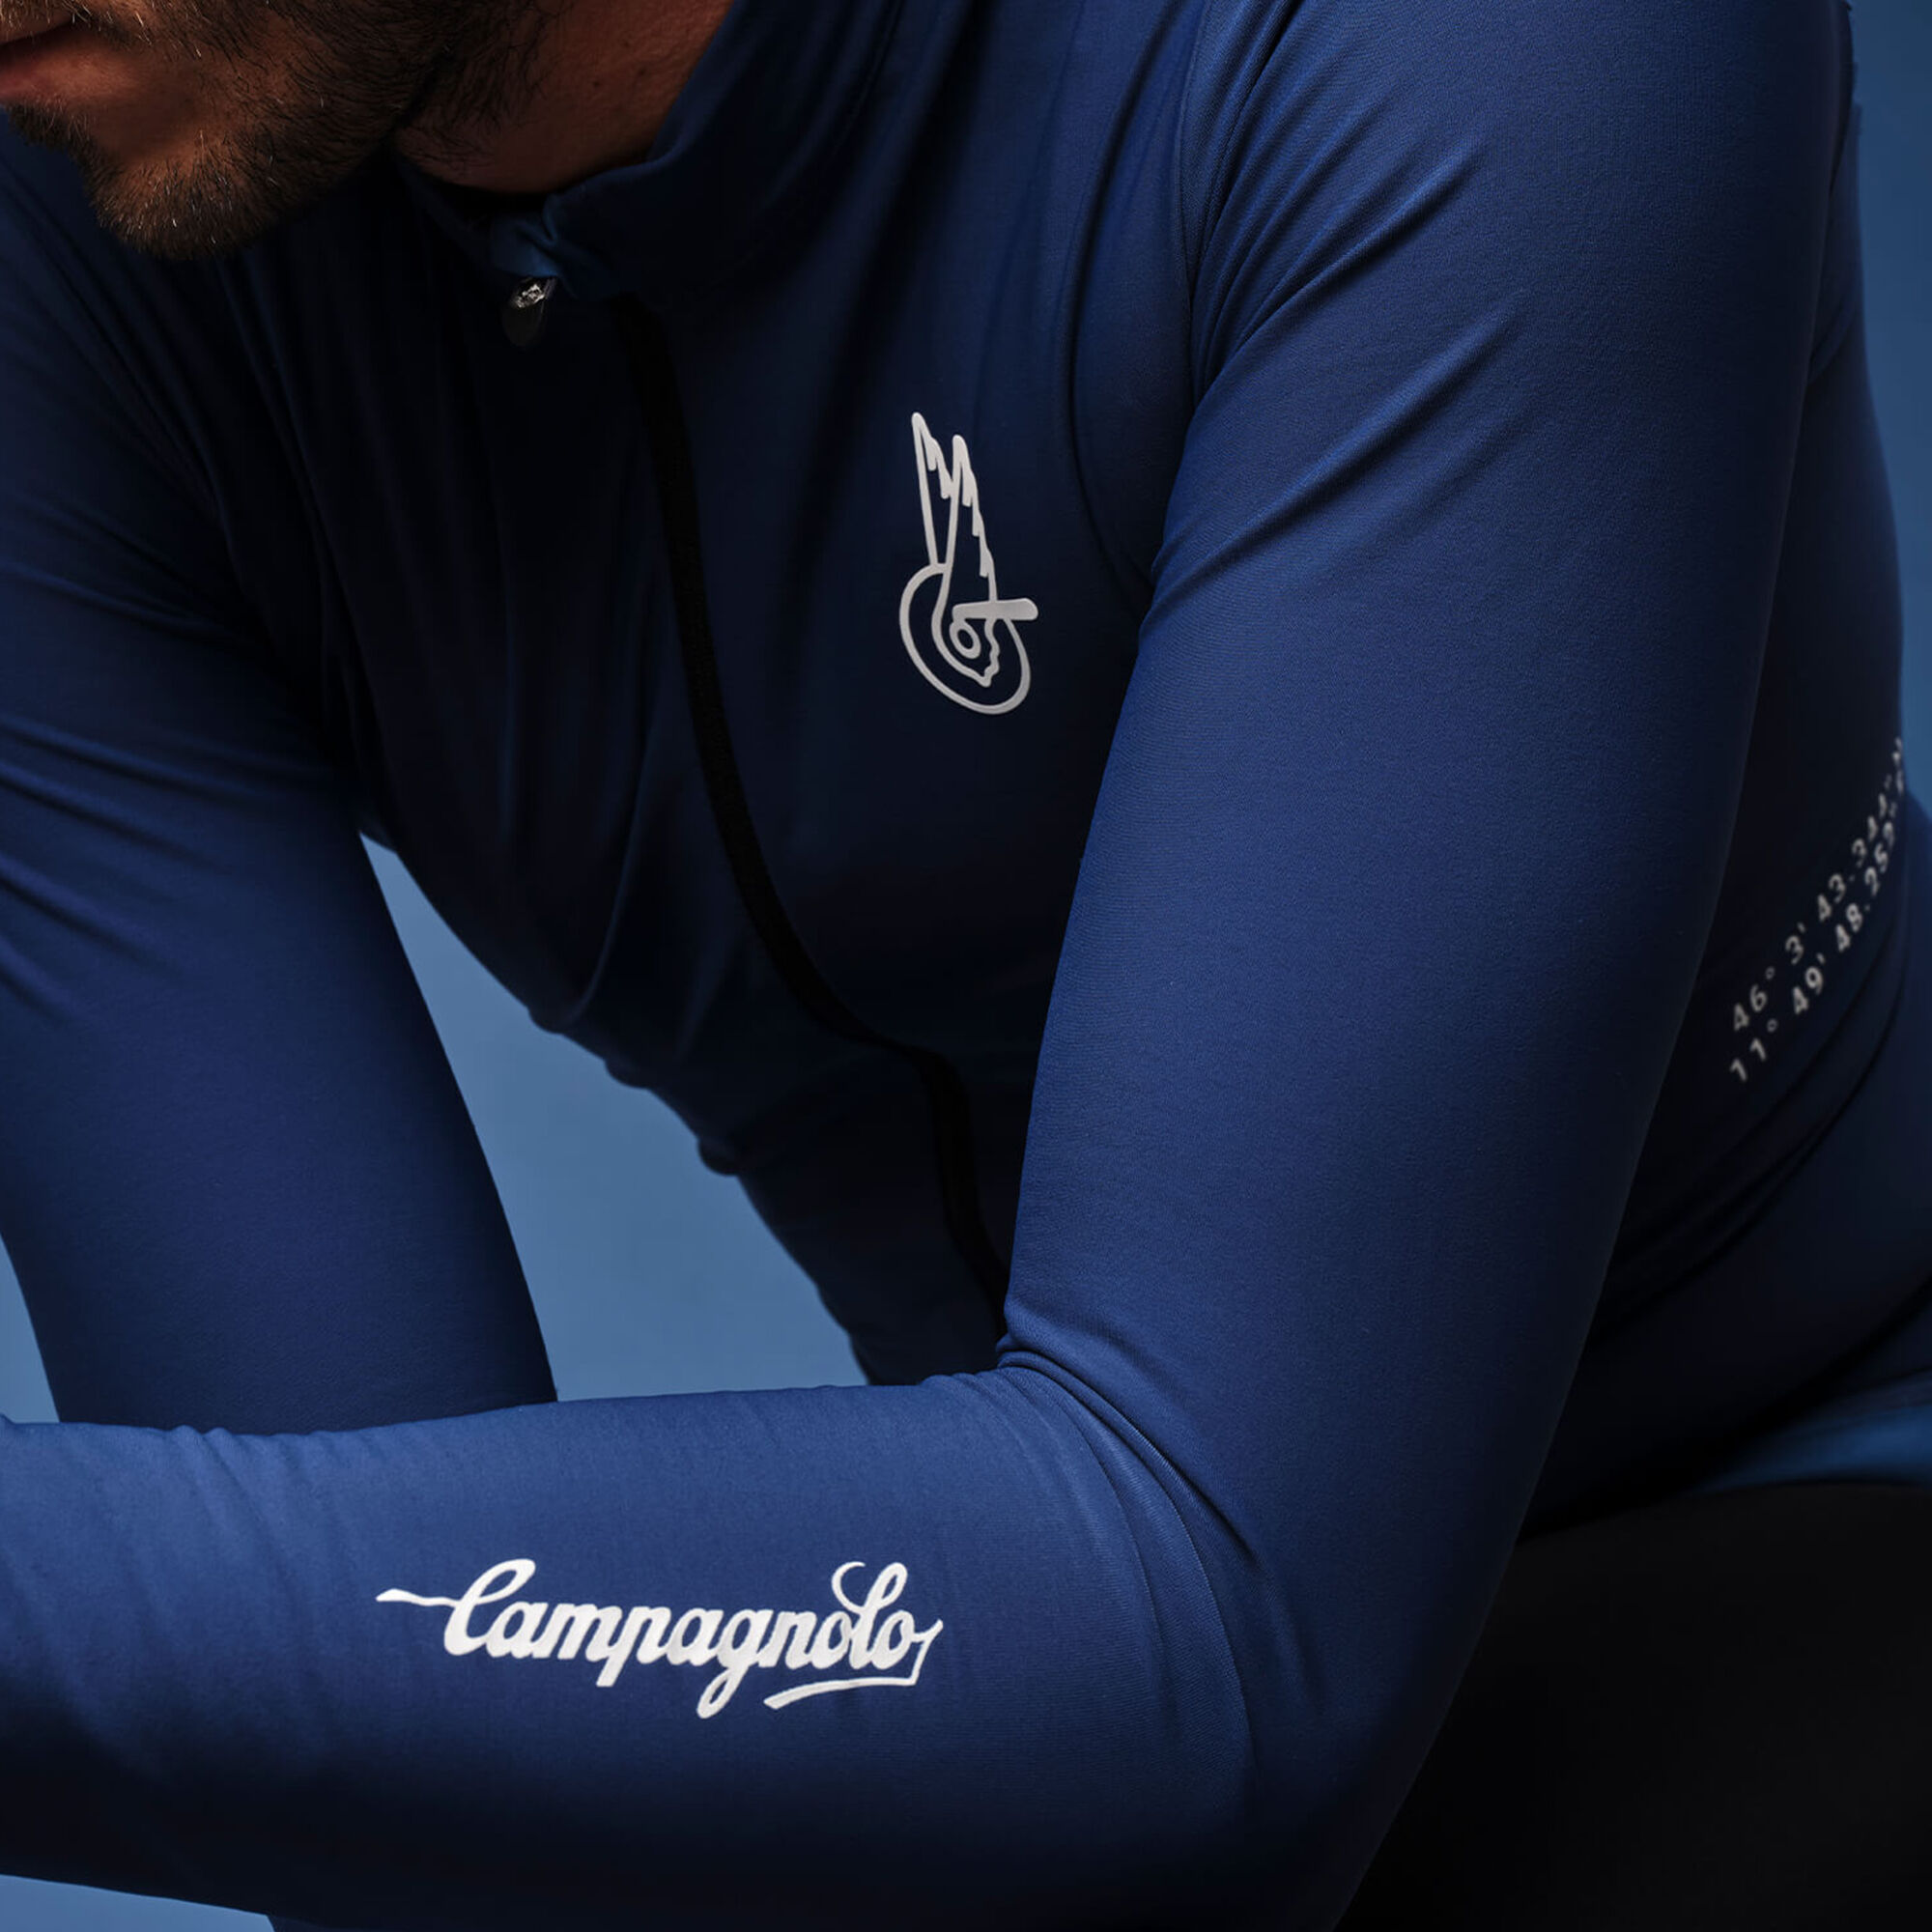 Croce D'Aune Men's Thermal Jersey | Campagnolo